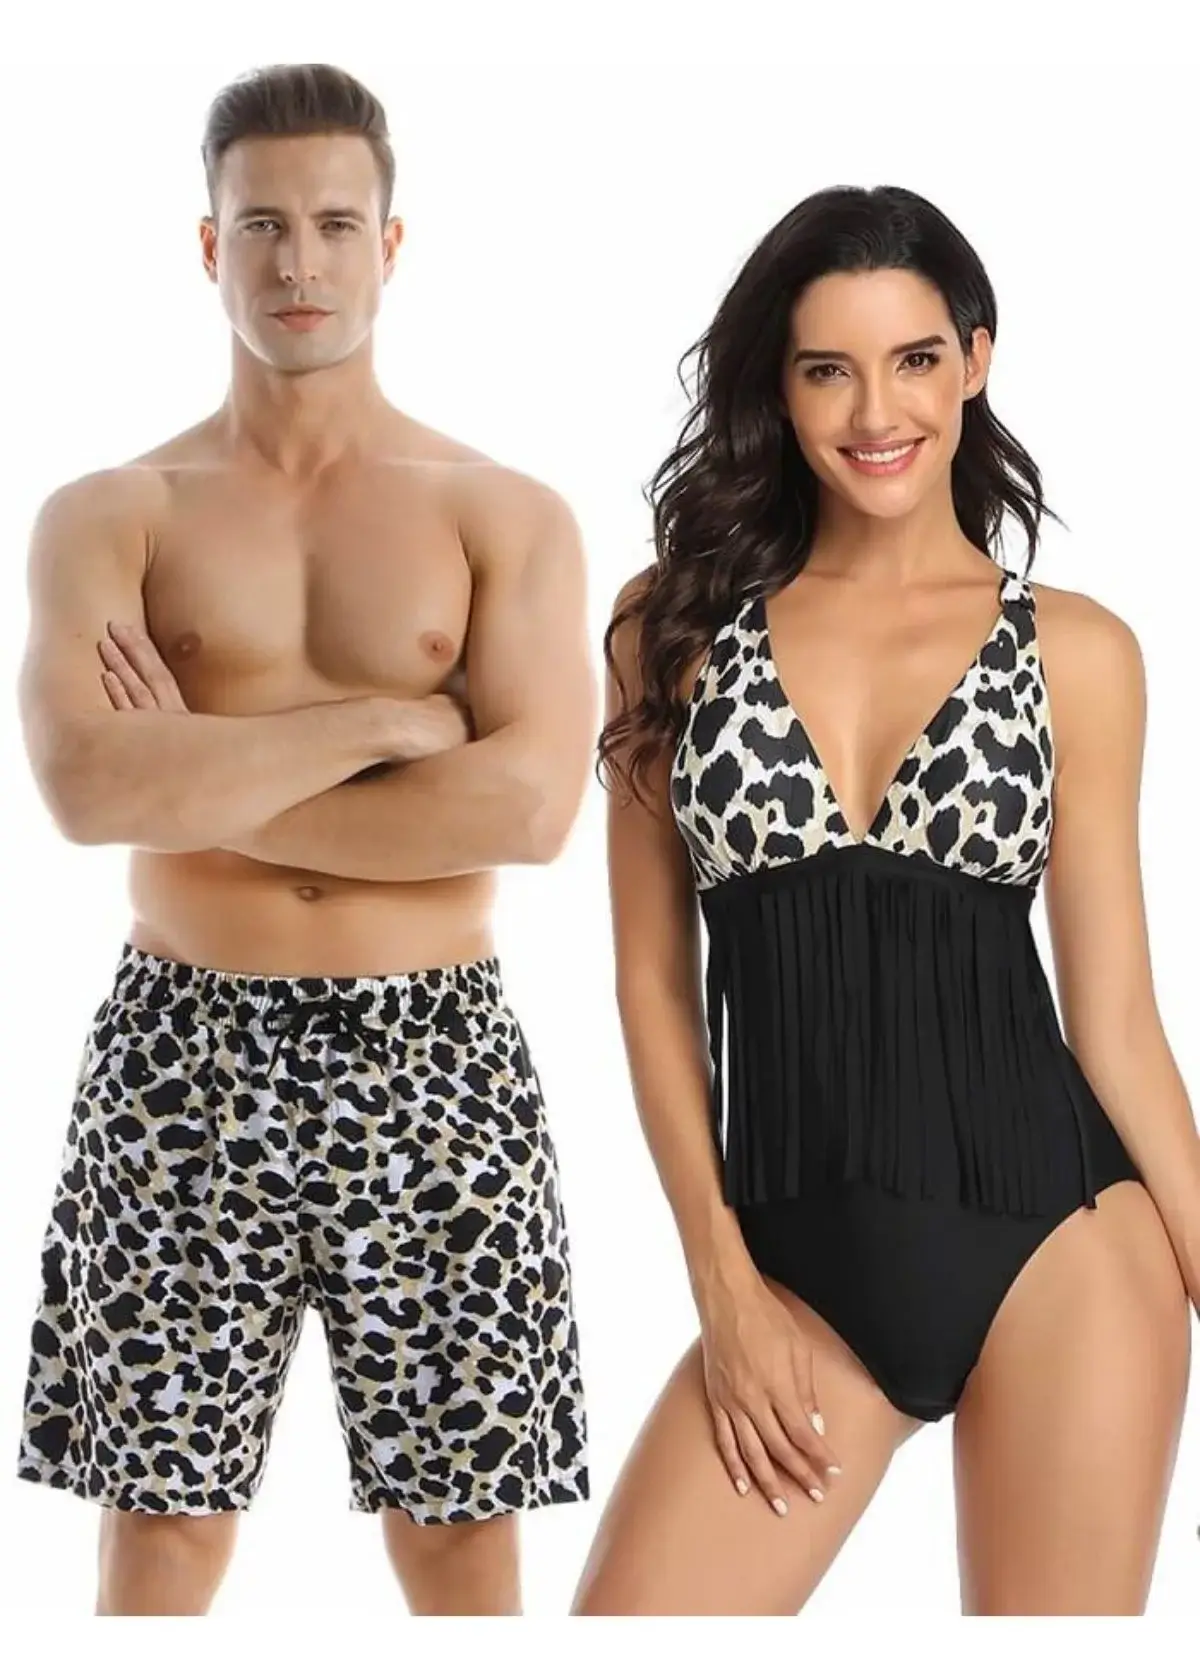 How to choose the right matching swimsuits for couples?